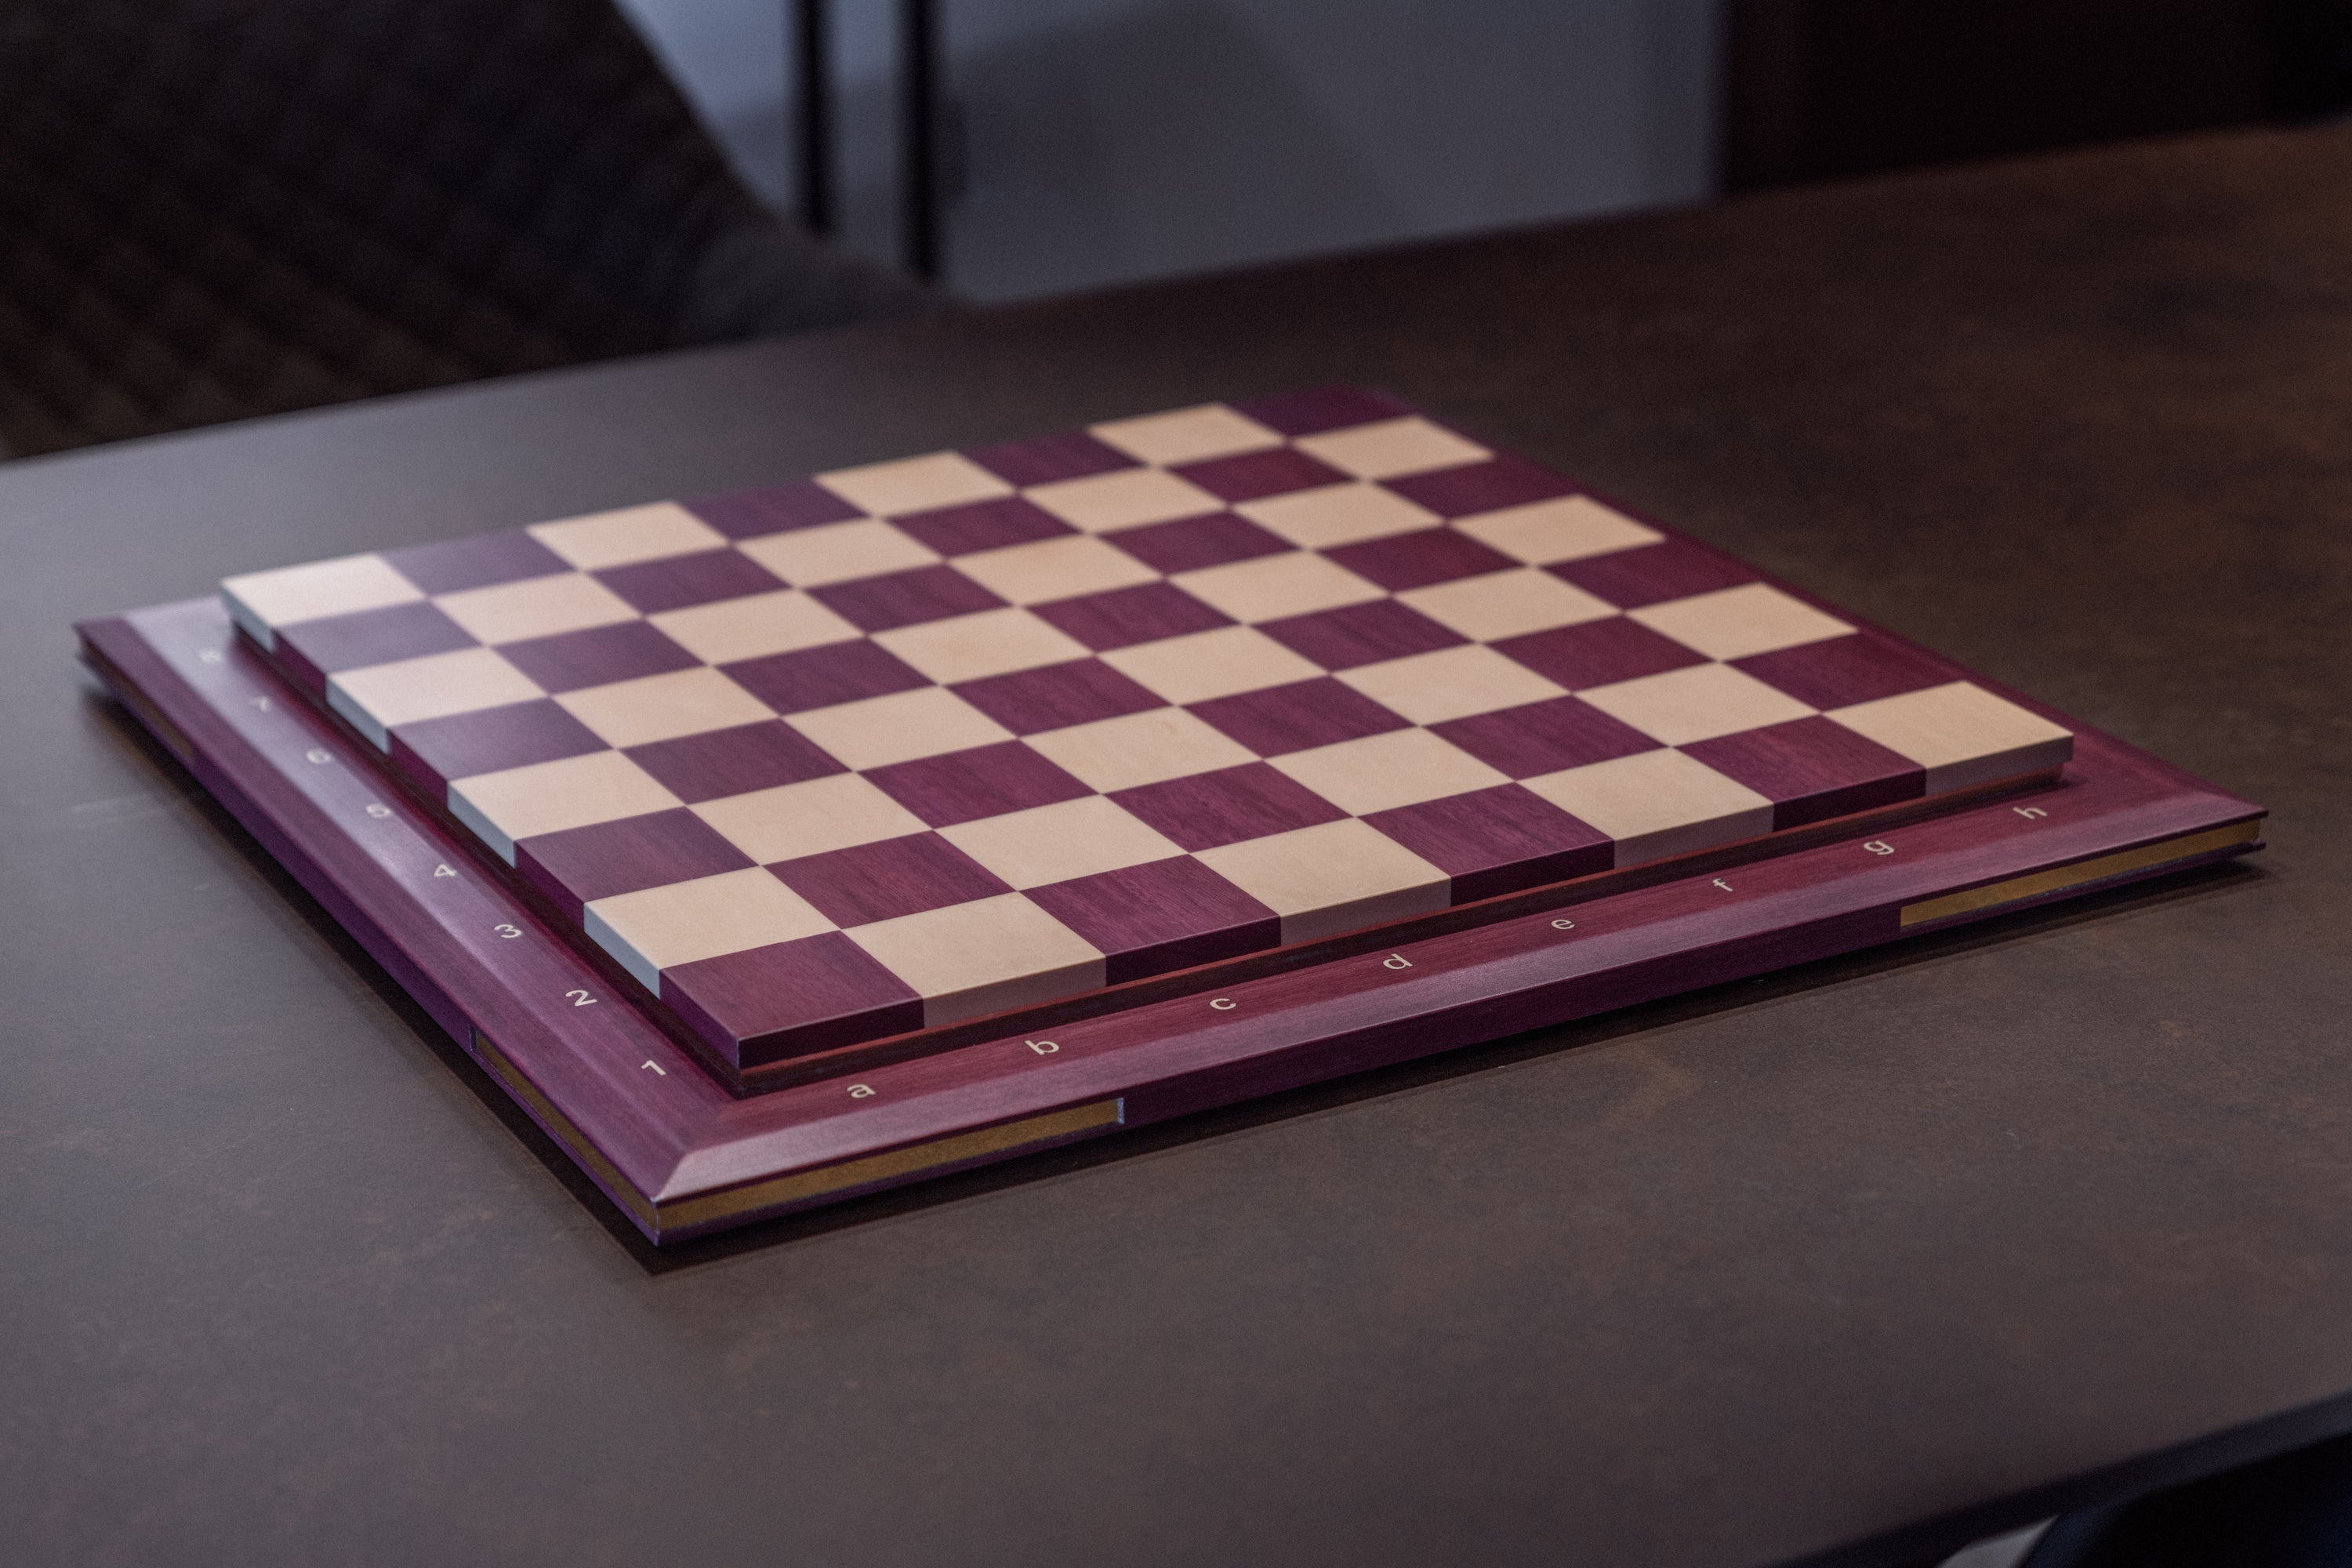 Custom Contemporary Chess Board - Purpleheart / Curly Maple - 2.5 Squares